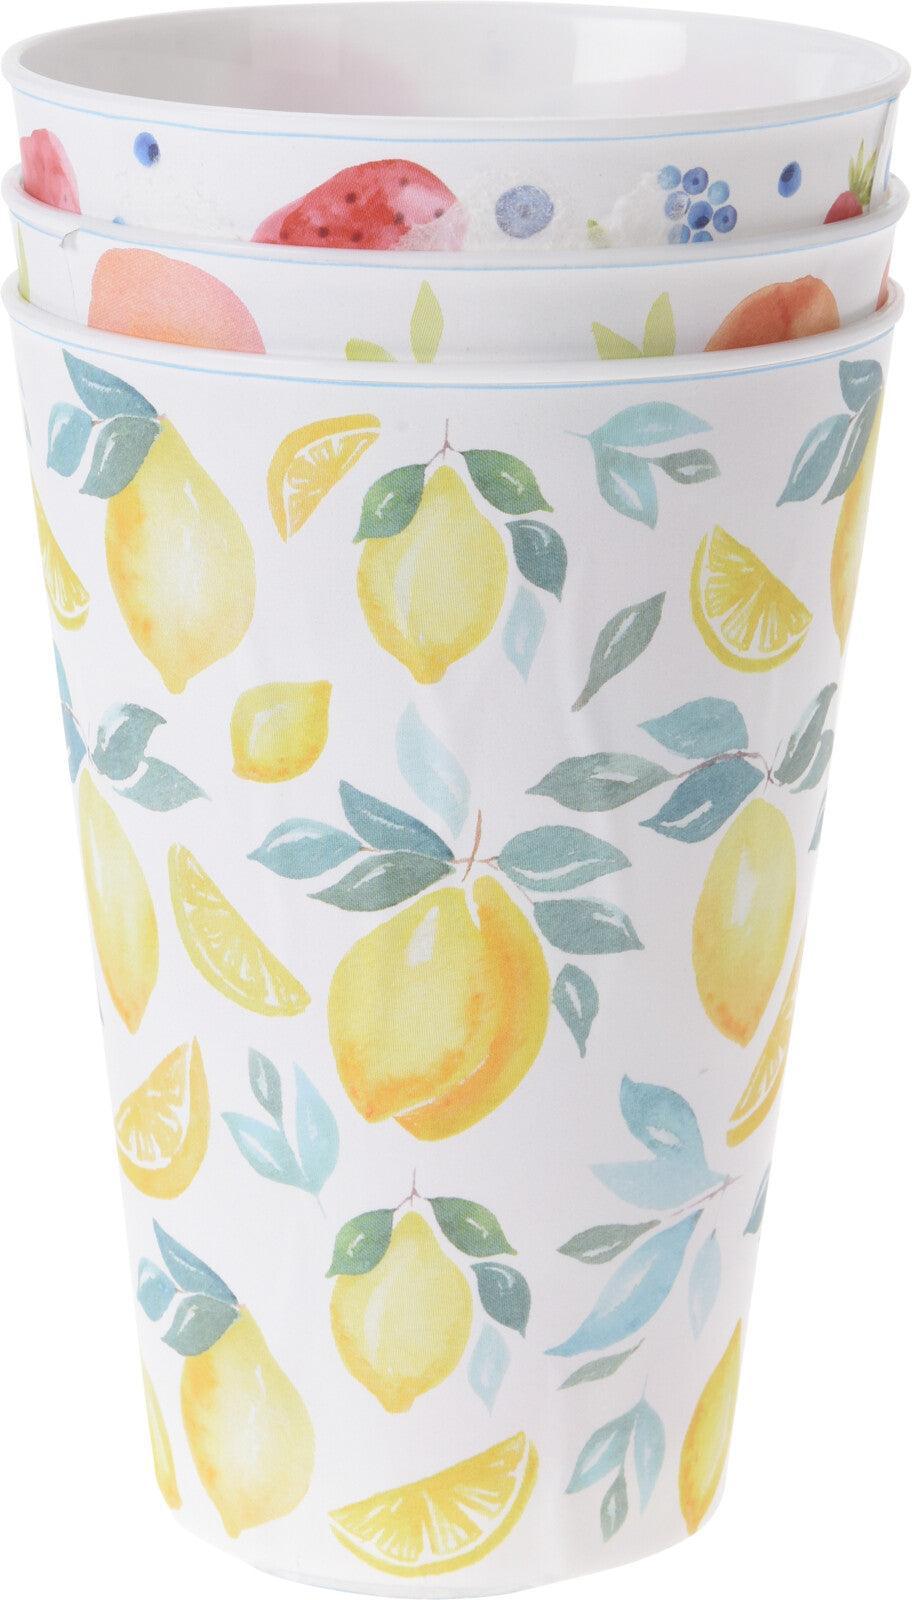 Summer Fruity Design Plastic Cups | 3 Pack - Choice Stores